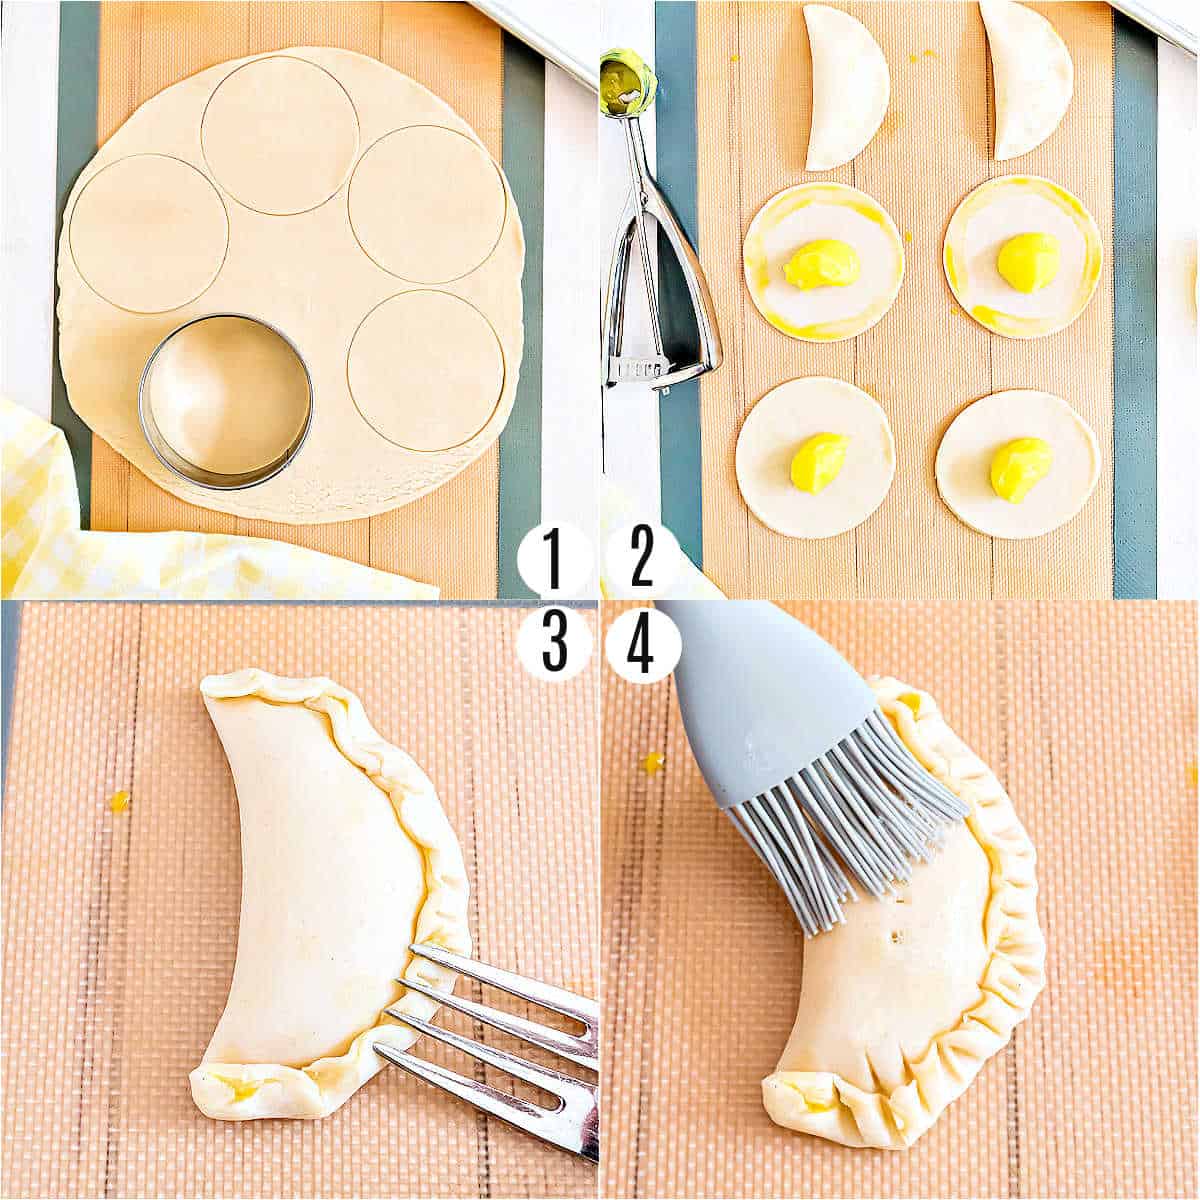 Step by step photos showing how to make lemon hand pies.